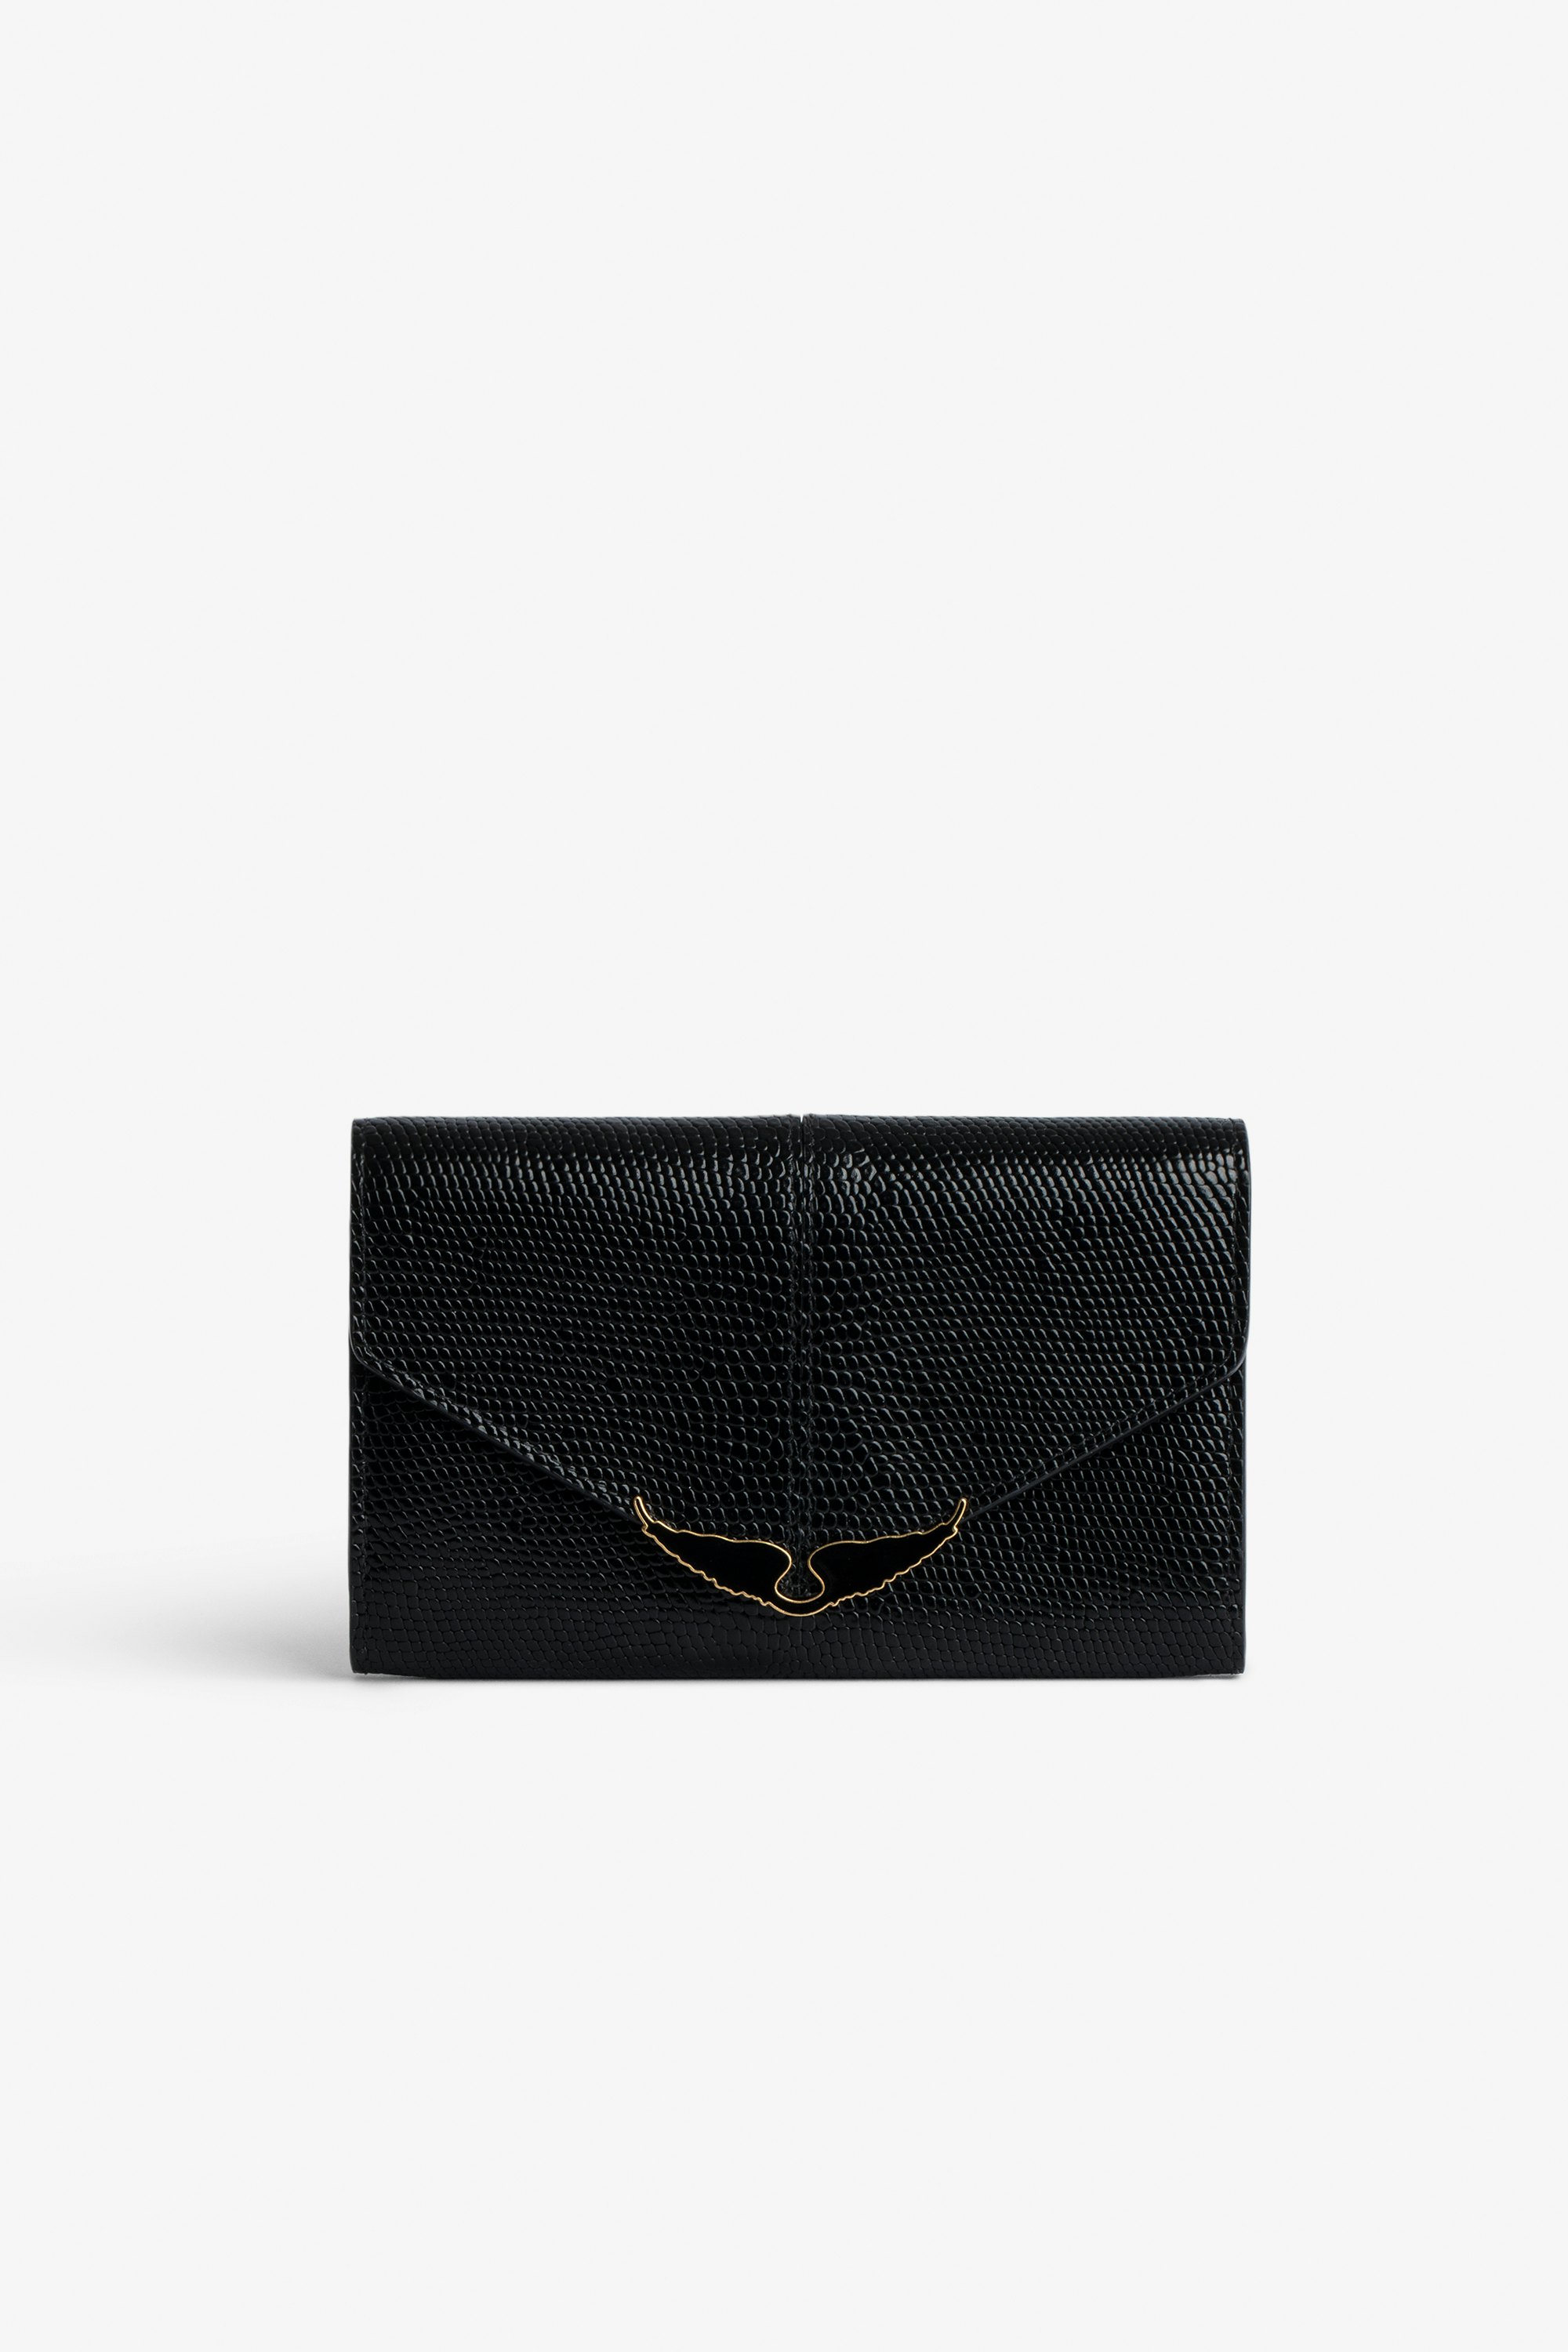 Borderline Wallet - Women’s wallet in shiny black leather with embossed iguana and black lacquered wings on the clasp.